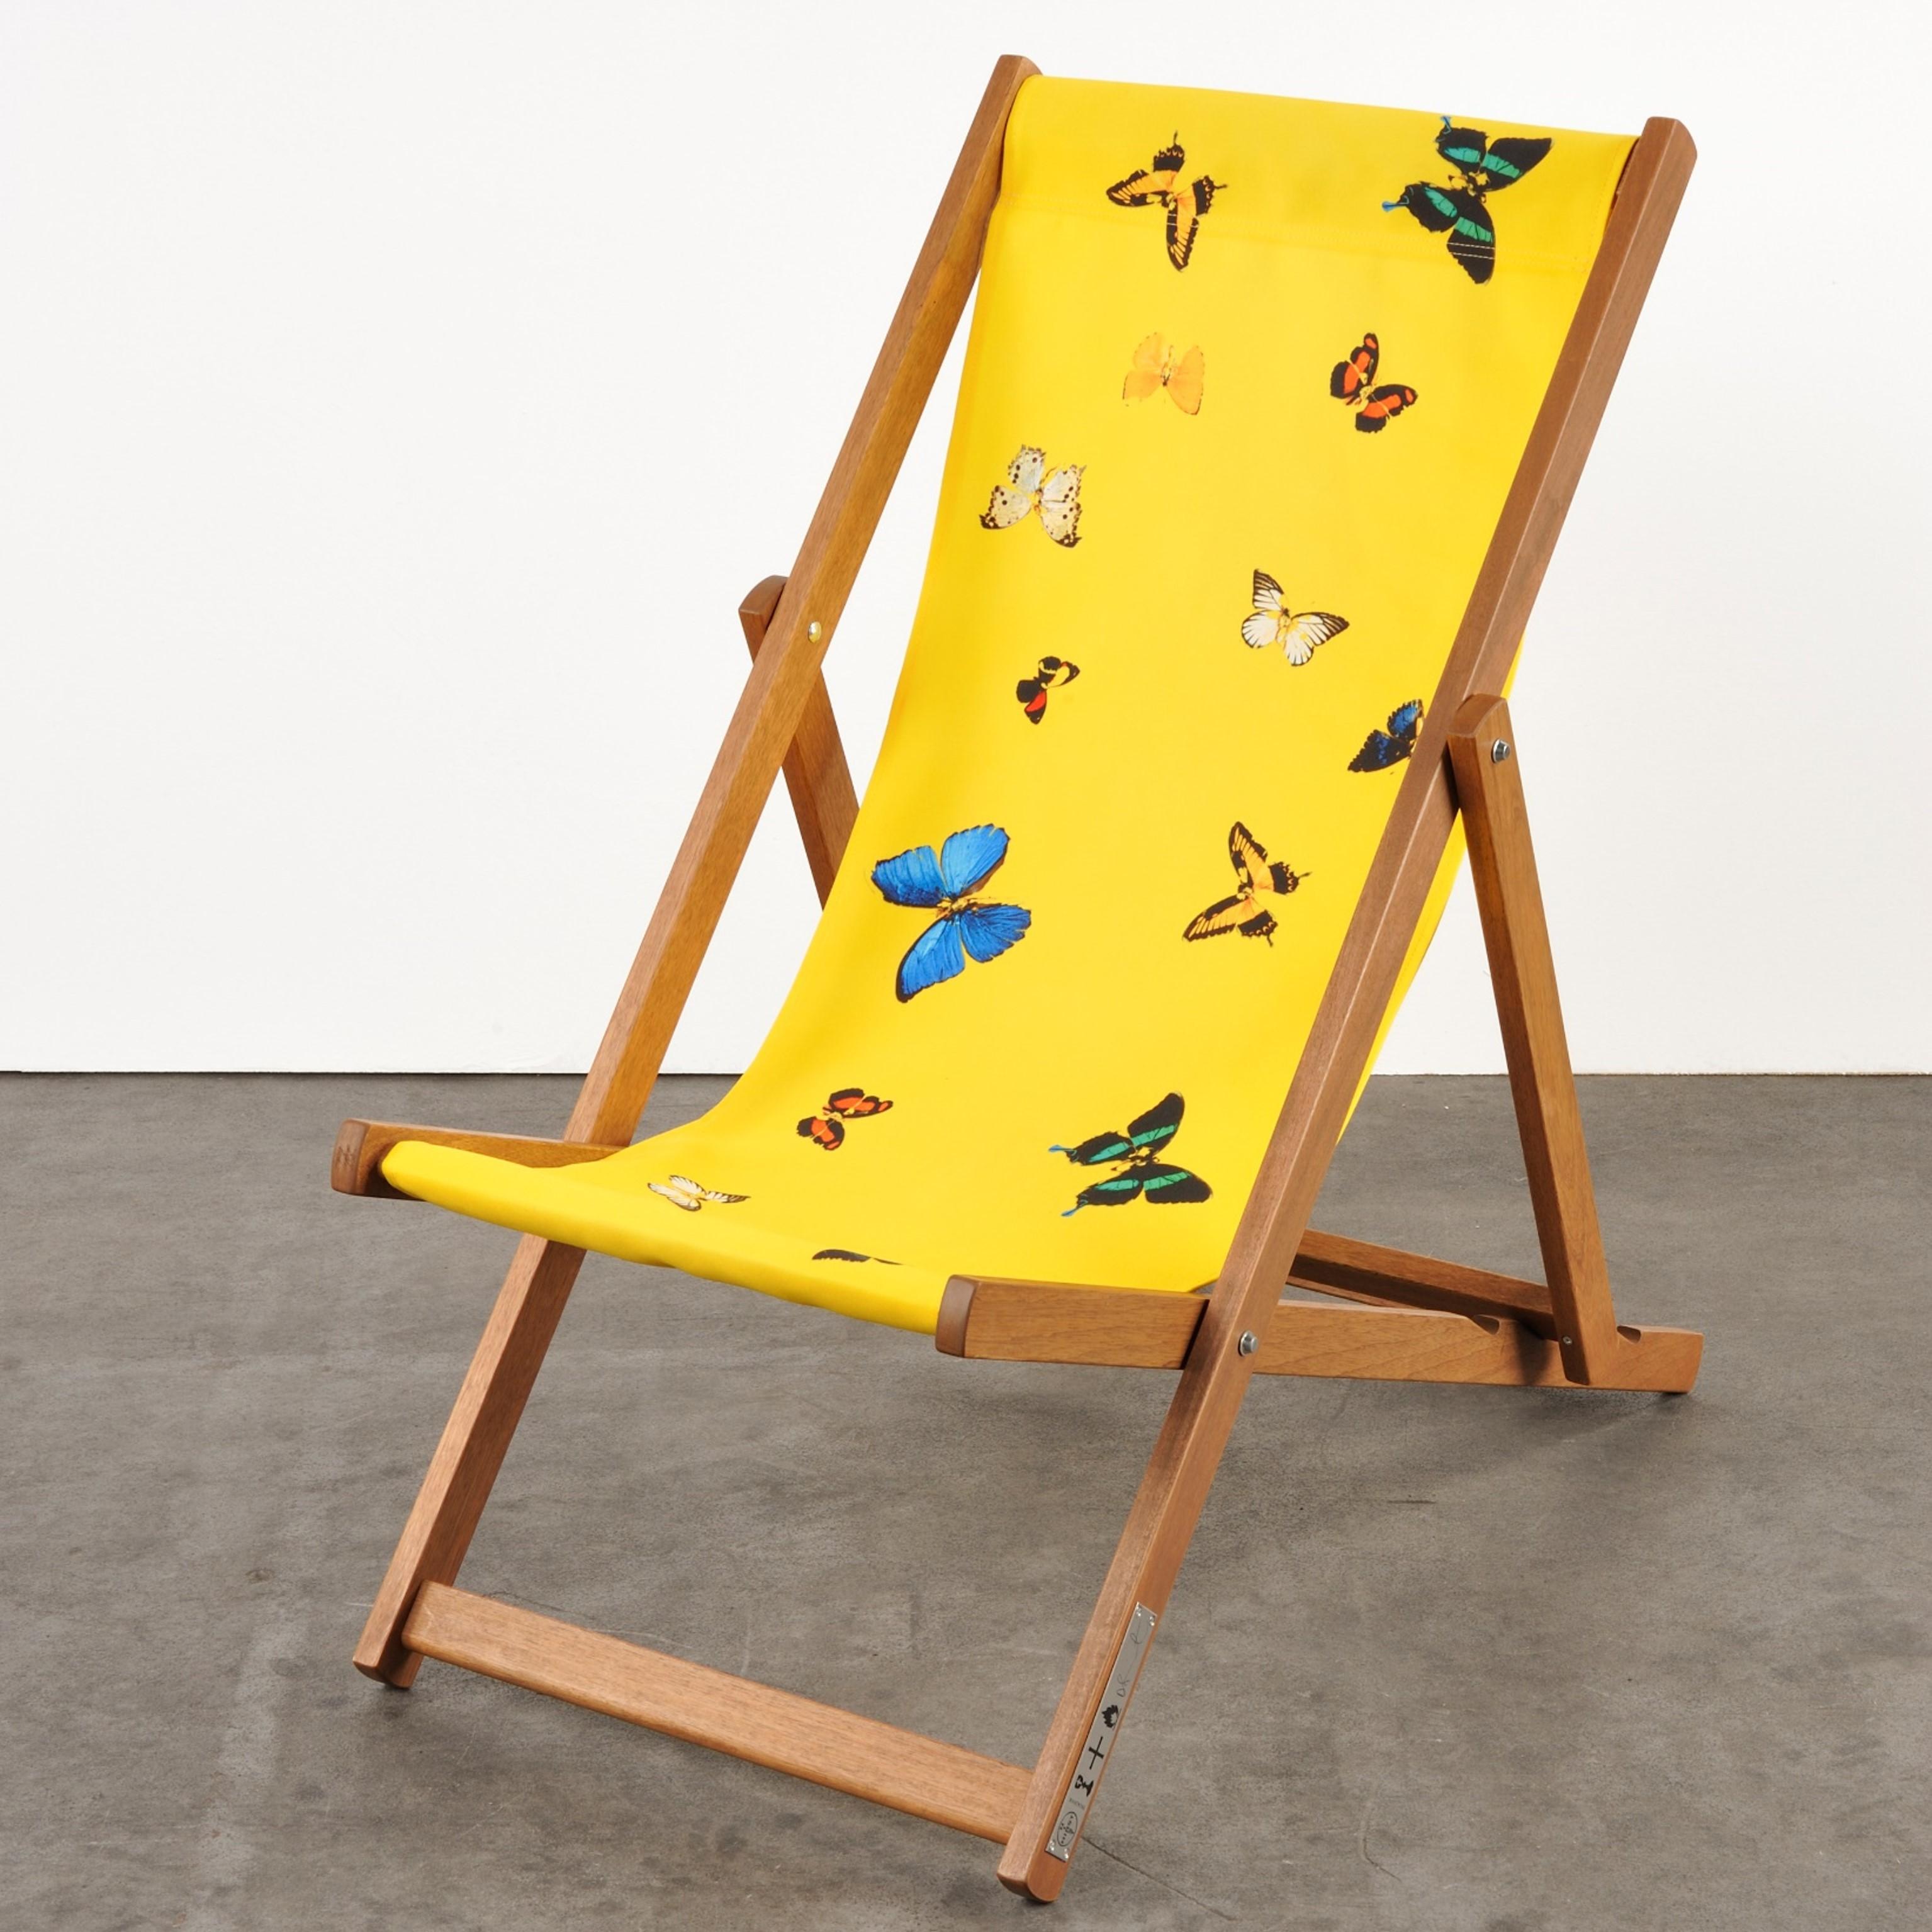 Hirst's Deckchairs use one of the artist's familiar motifs: a monochromatic background interrupted by a scattering of butterflies freezed in an eternal position. 

Damien Hirst
Deckchair (Yellow) - Contemporary art, 21st Century, Yellow, Design,